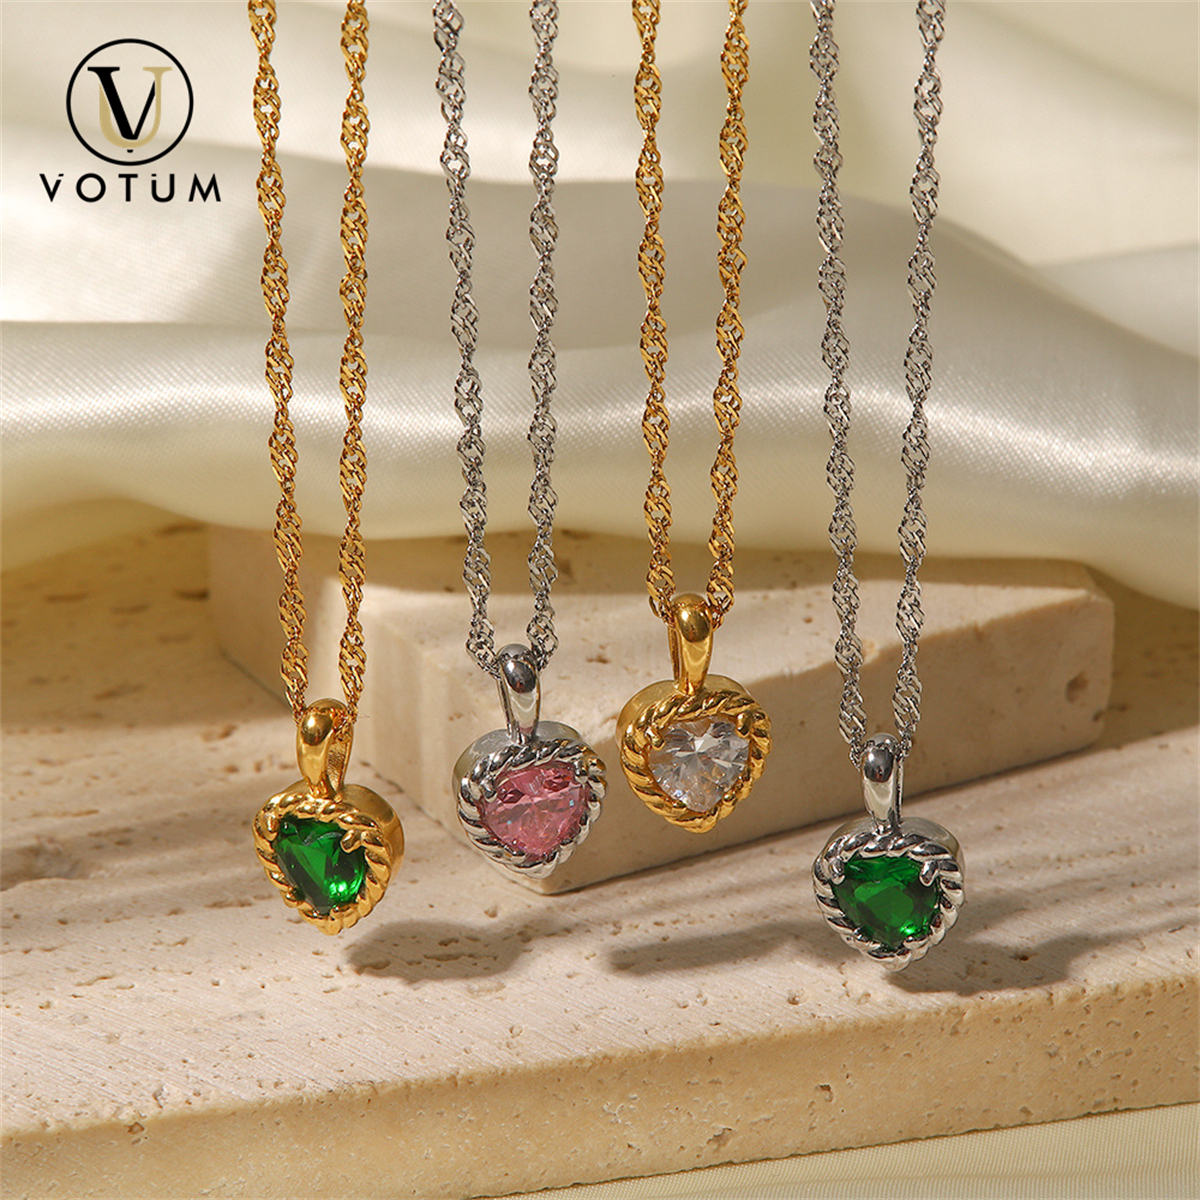 Votum Wholesale Natural Crystal Heart Pendant Chain Necklace with Semi Gemstone 925 Sterling Silver 18K Gold Plated Custom Fine Jewelry Jewellery Accessories